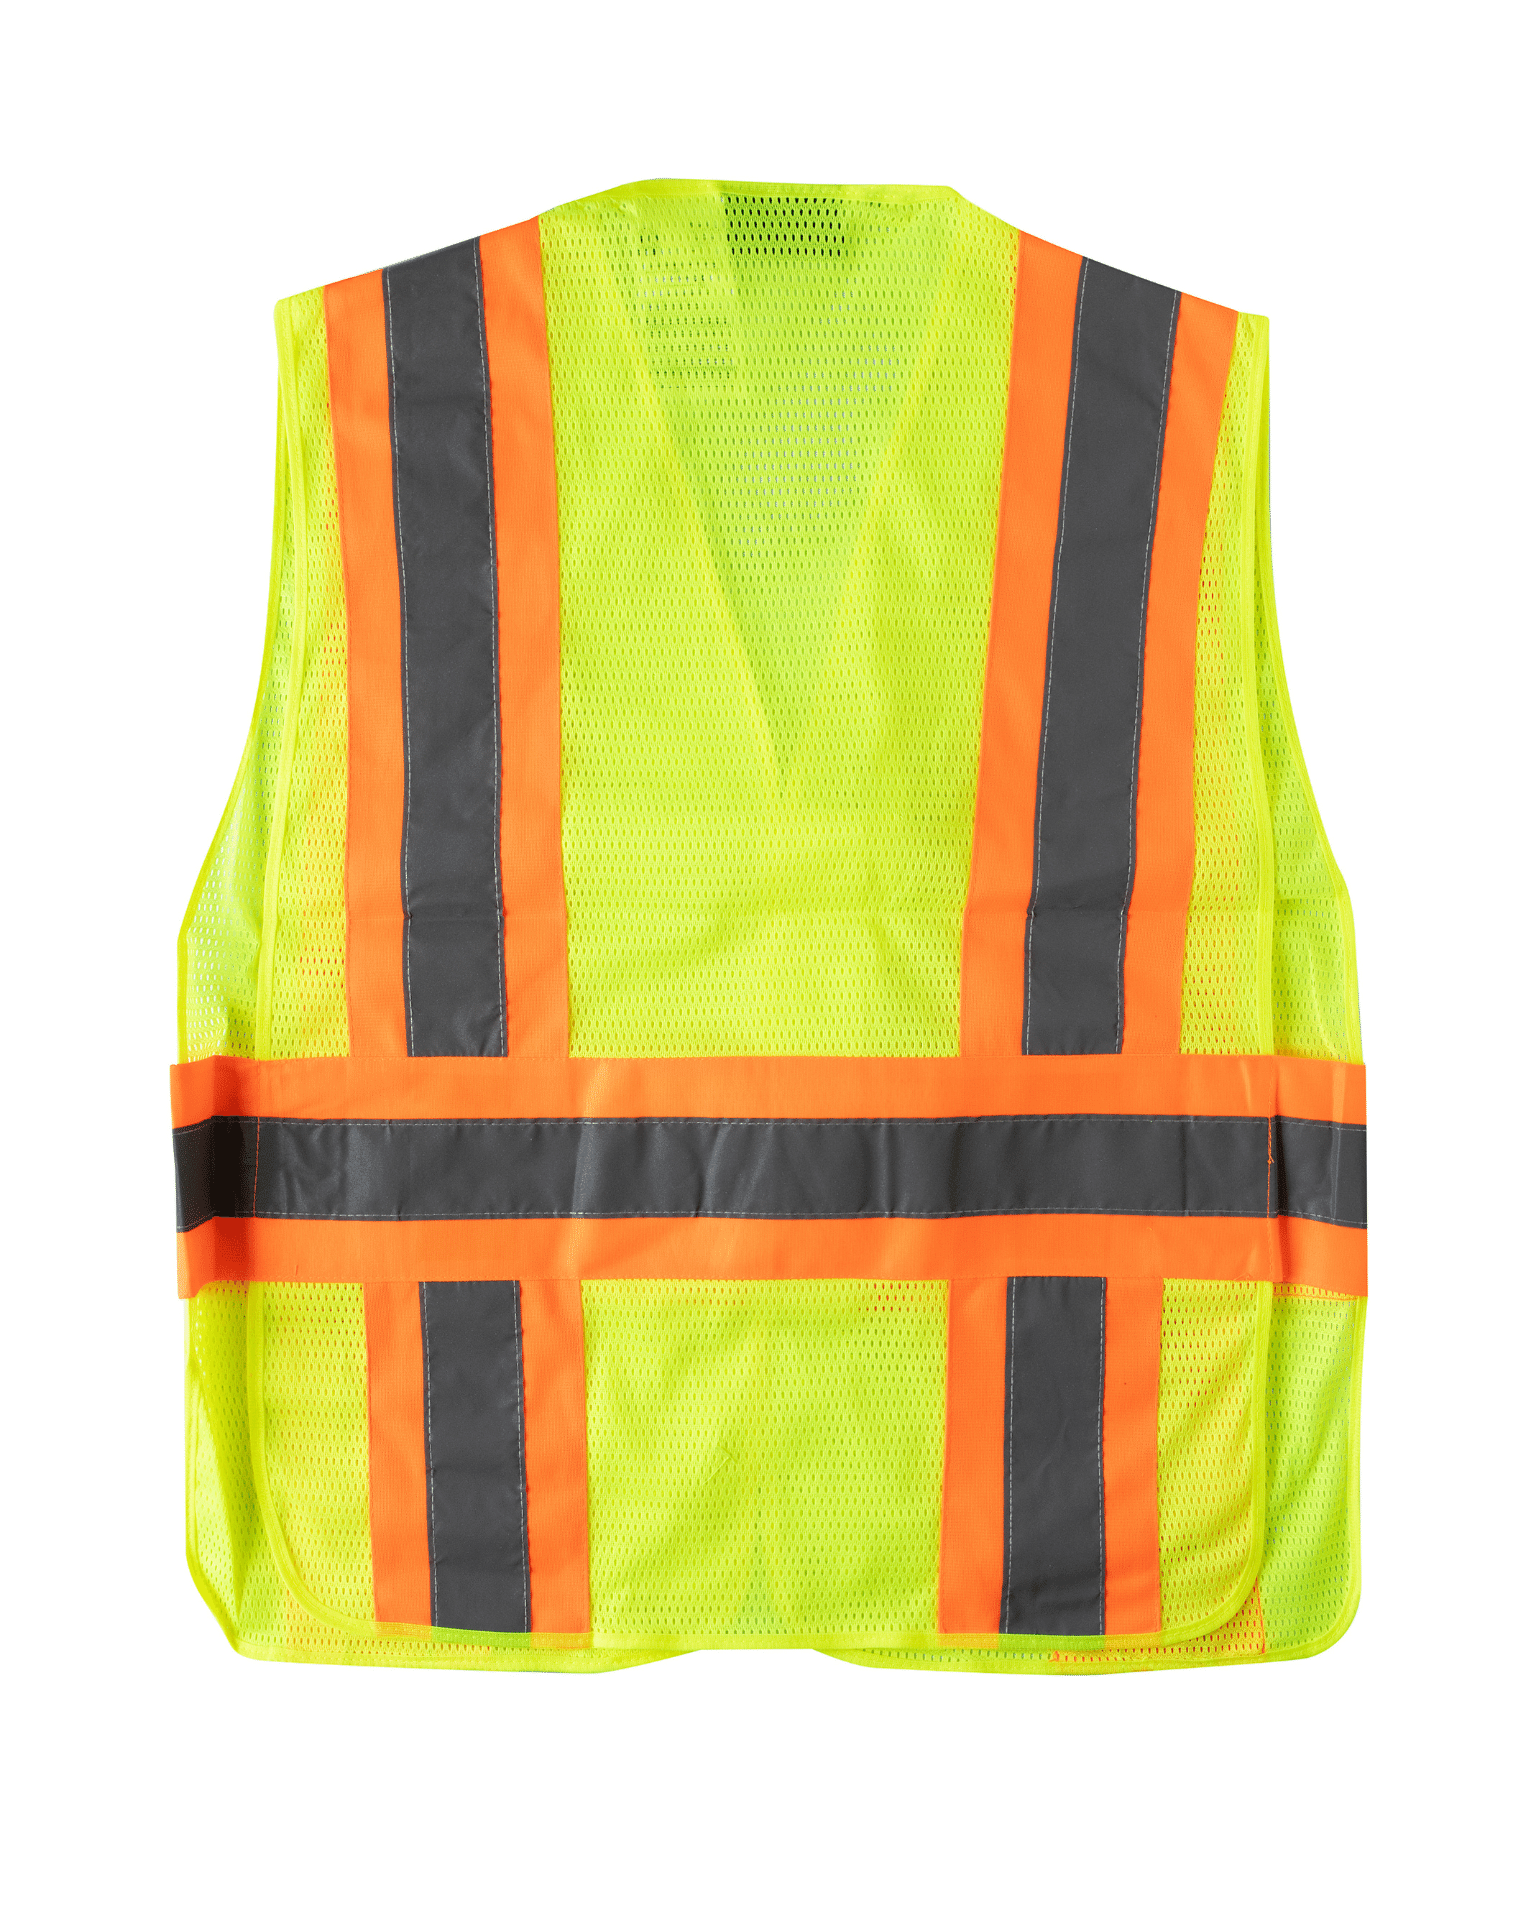 ANSI Class 2 High Visibility safety striping lightweight mesh vest by Utility Pro